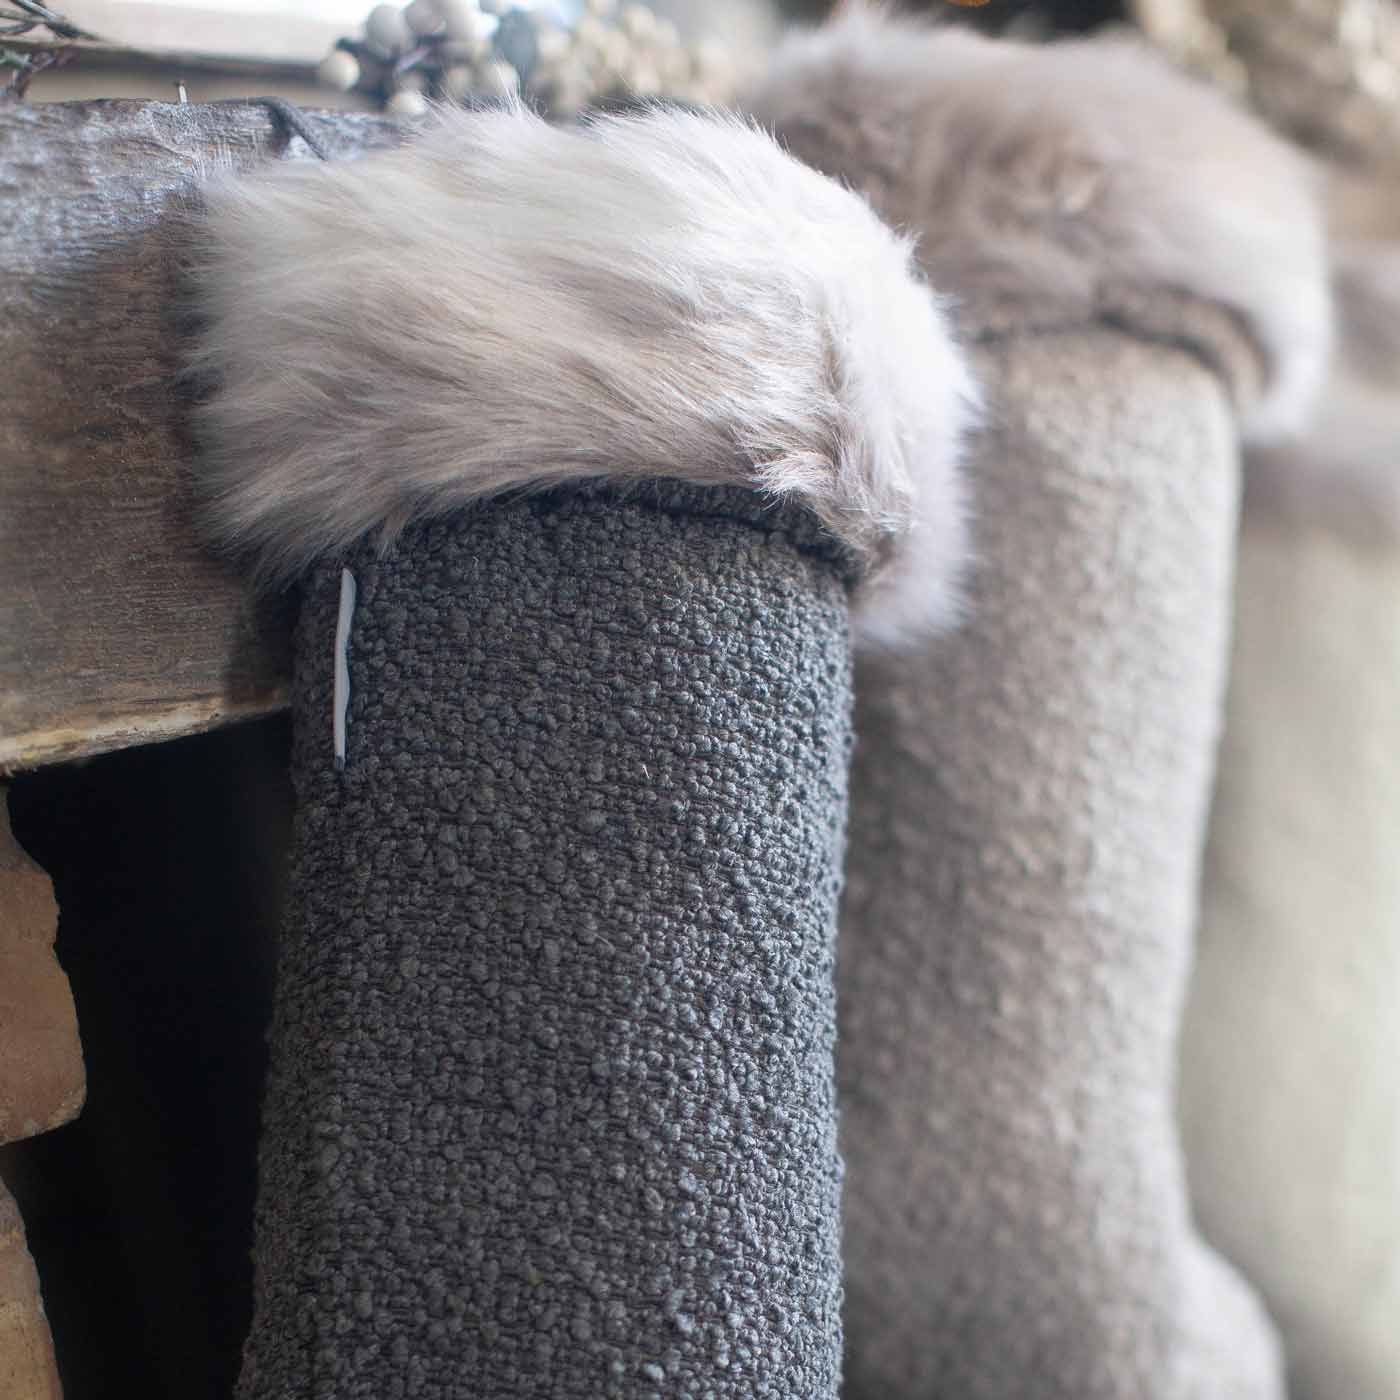 Gift your furry friend the perfect pet Christmas gift with our beautifully crafted Christmas Stocking Sock, fill and gift your pet this festive holiday with the most wholesome gifts for Christmas! Available now in stunning Boucle collection - Granite, Mink, Ivory at Lords & Labradors US